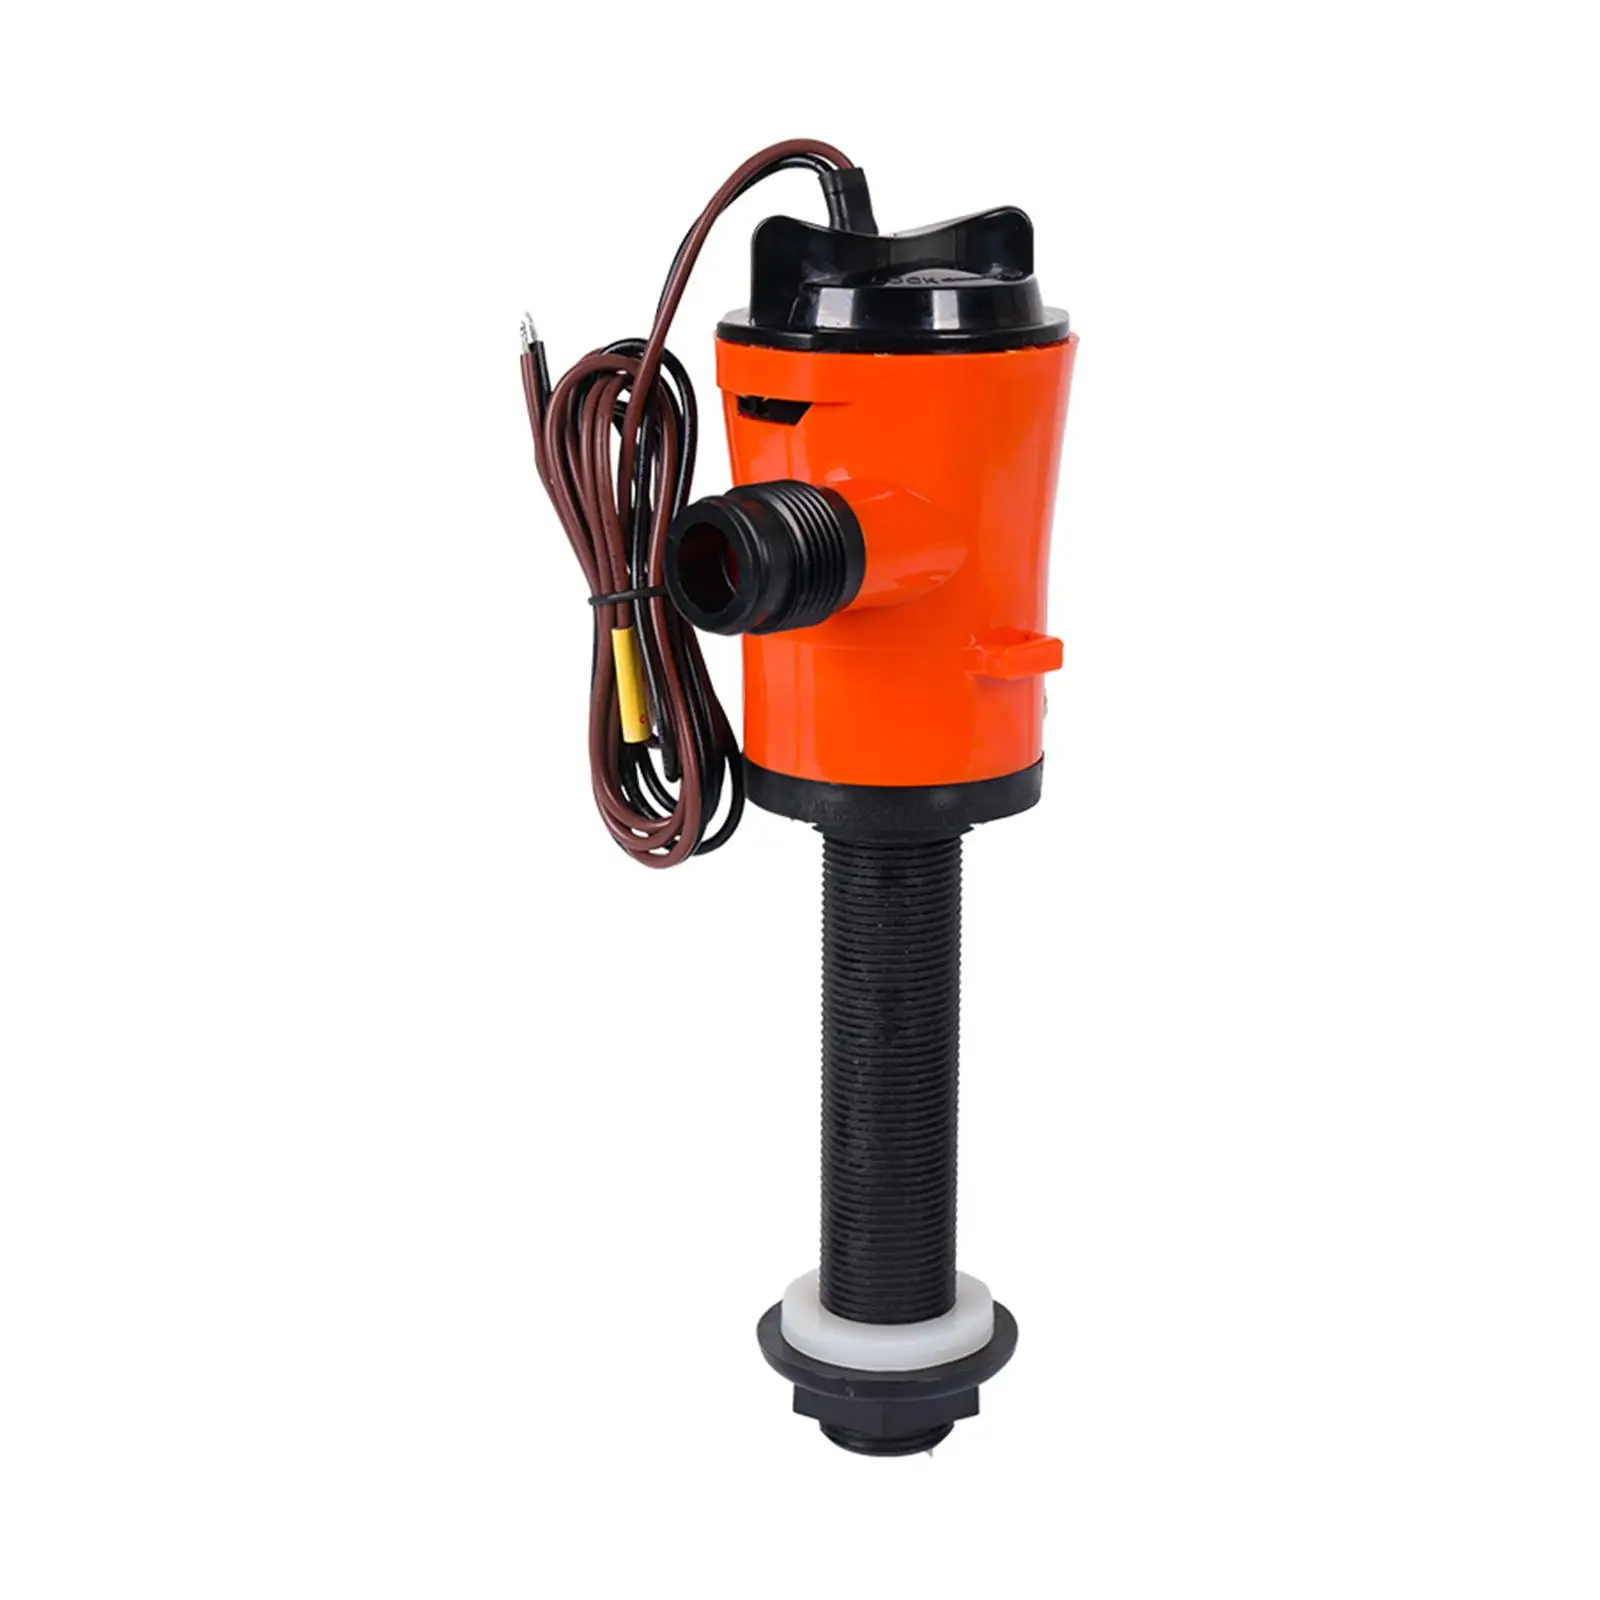 Livewell Pump for Boat Easy Installation Accessories Easy to Clean Boat Tools Durable Direct Replaces Repair Parts 24V 800GPH